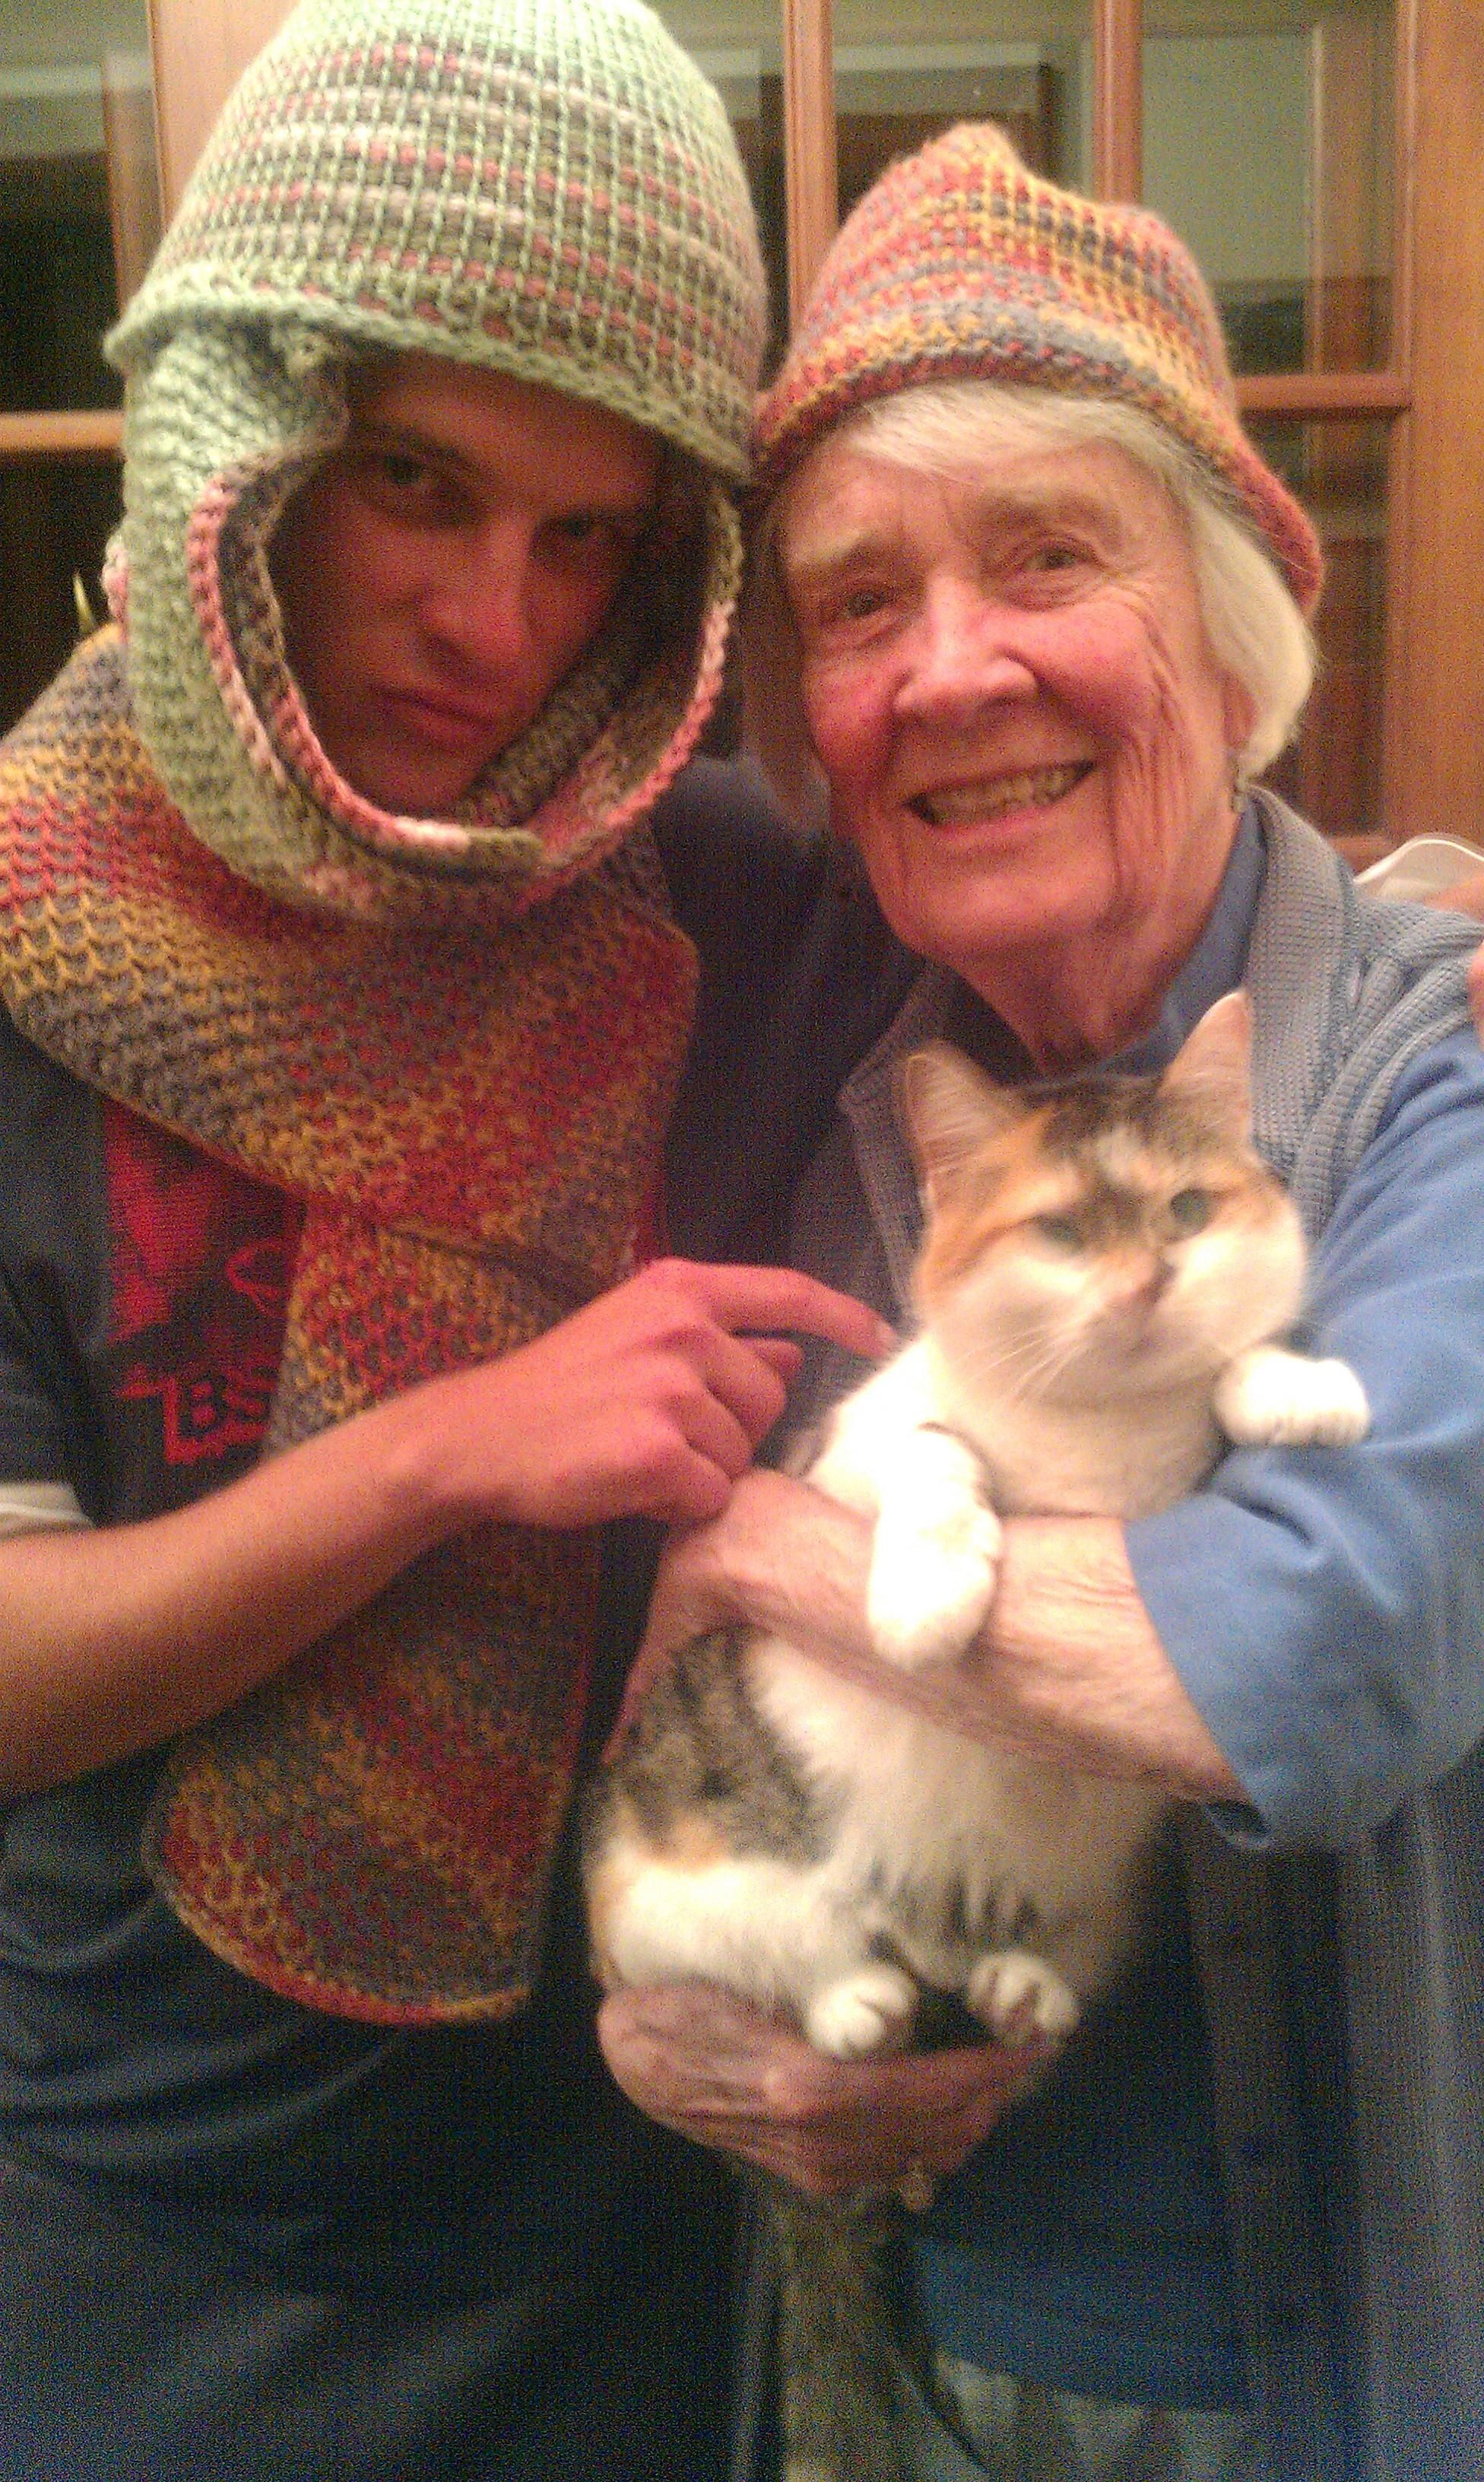 Got this in an email, I have no idea who these people, or the cat are.